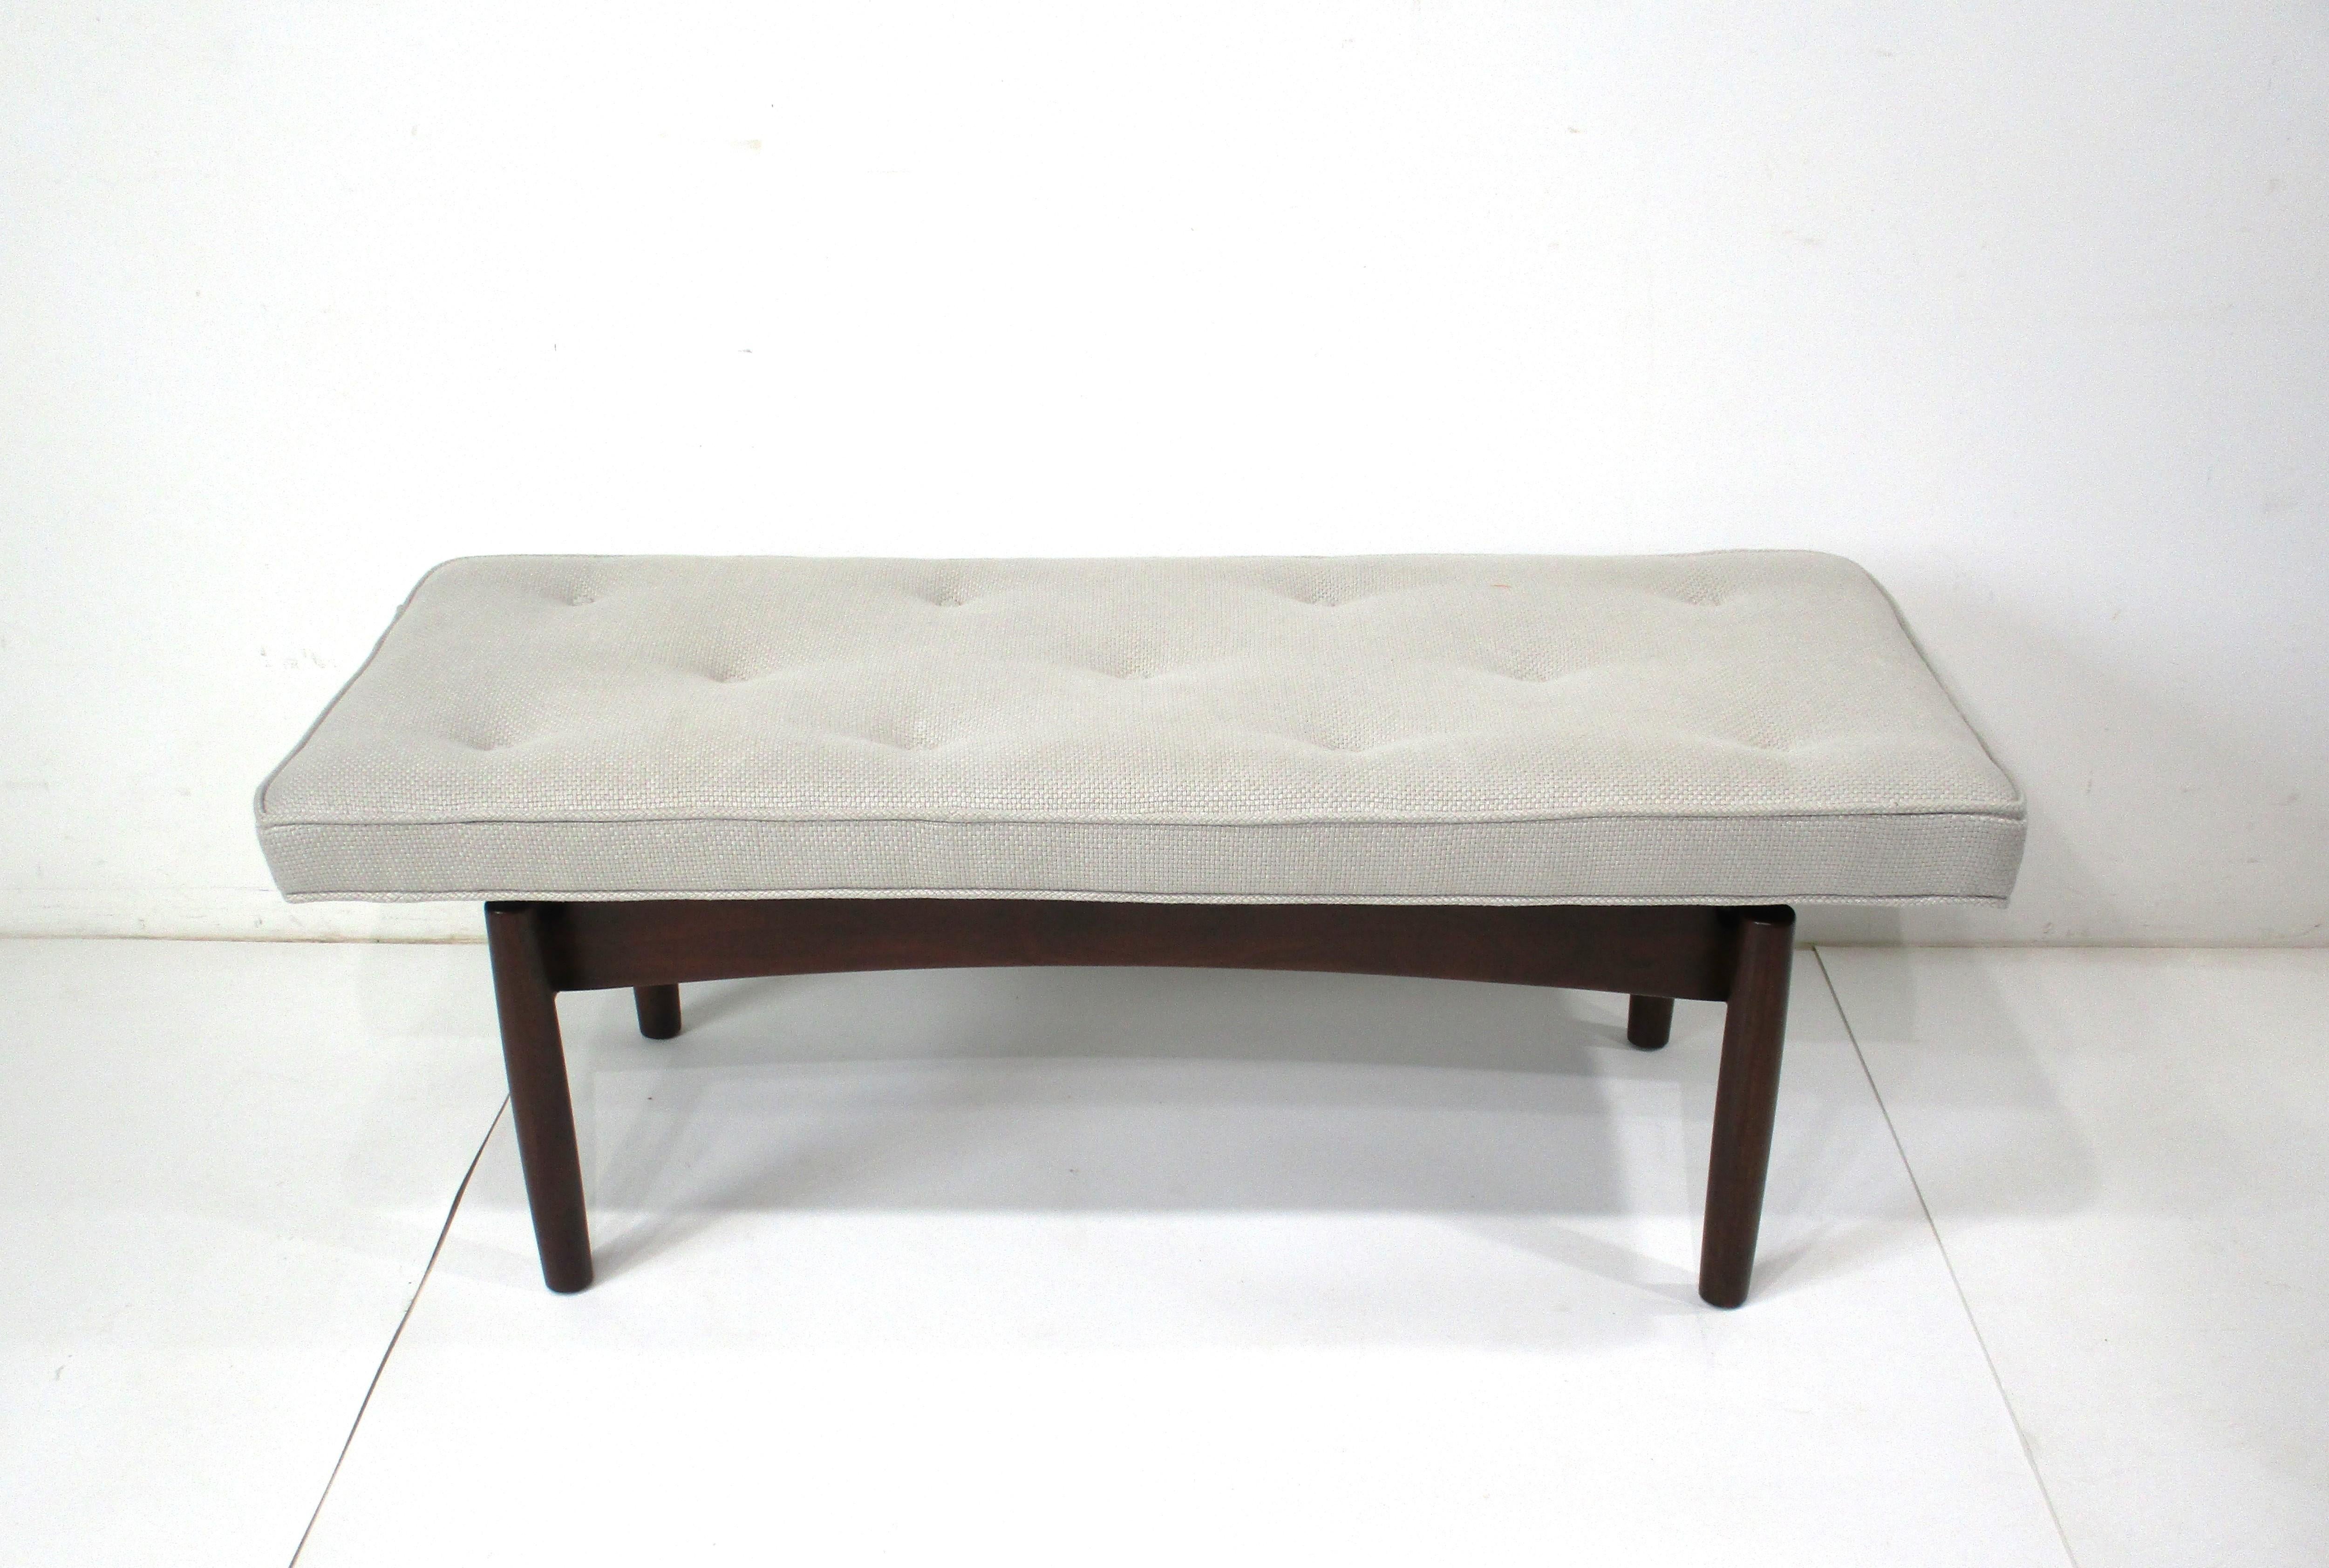 A mid-century bench with upholstered button top cushion in a soft gray Cream woven contract fabric. The bottom frame is in a dark walnut with very sturdy legs and a small cut out to the ends giving the cushion a floating affect. Designed in the